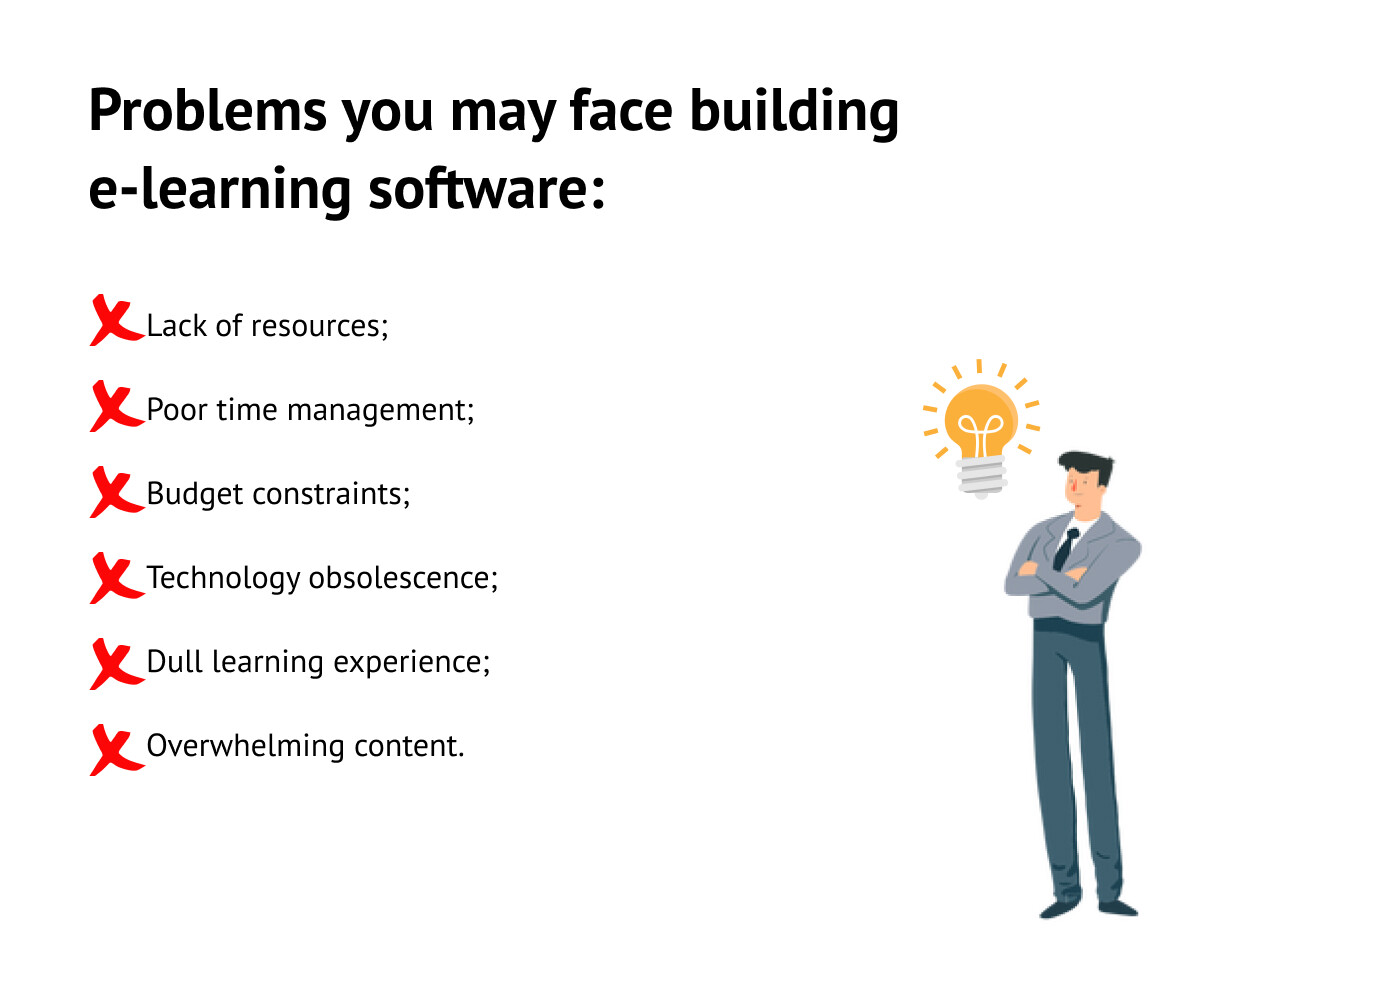 Problems of e-learning software development